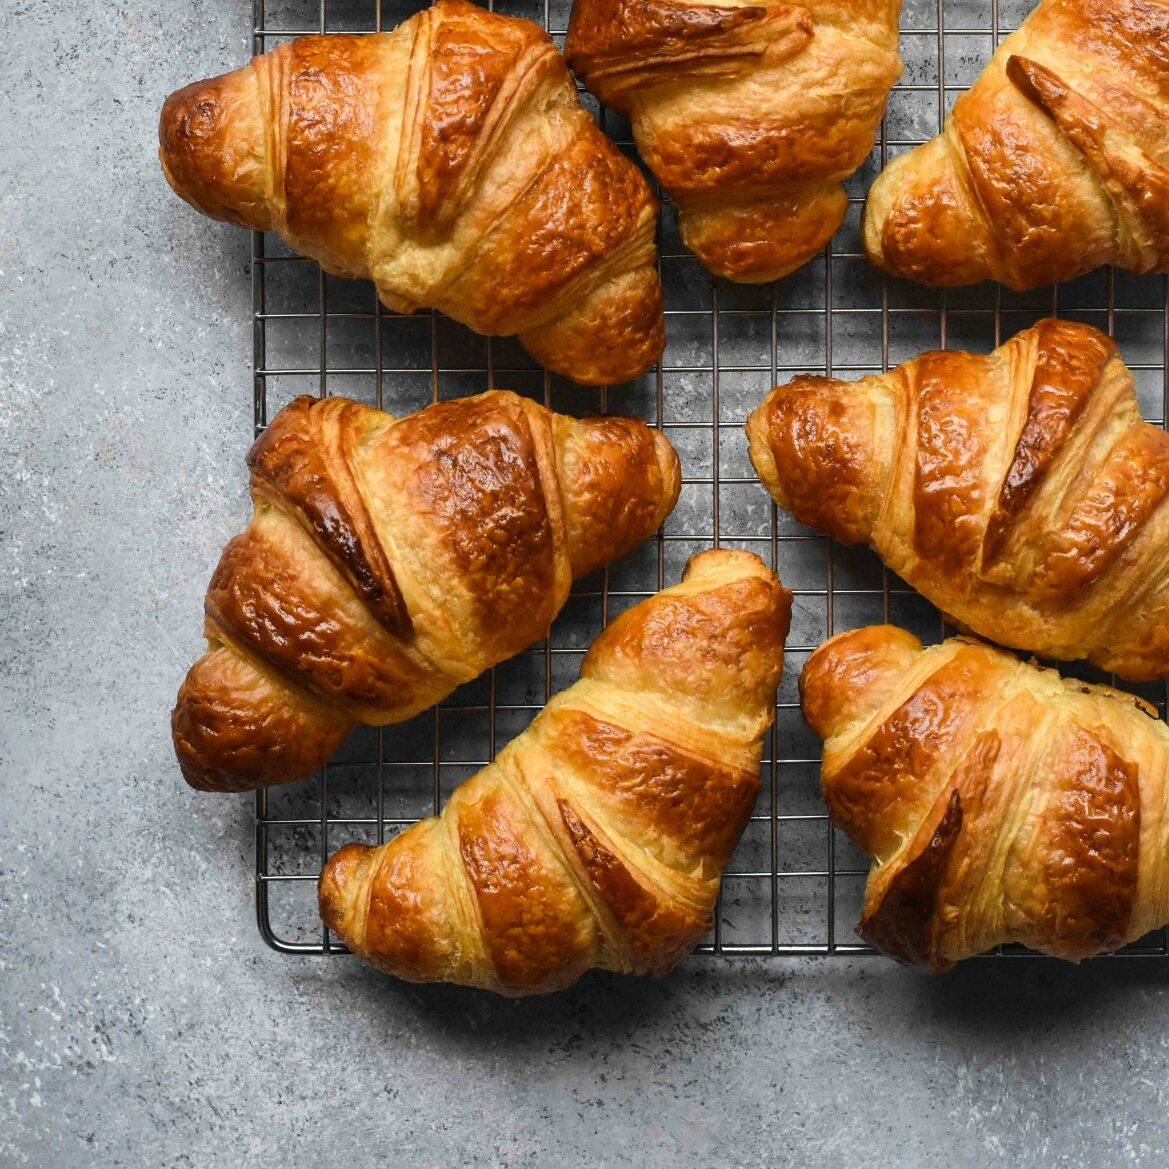 Classic French croissant recipe - The Best Video Recipes for All